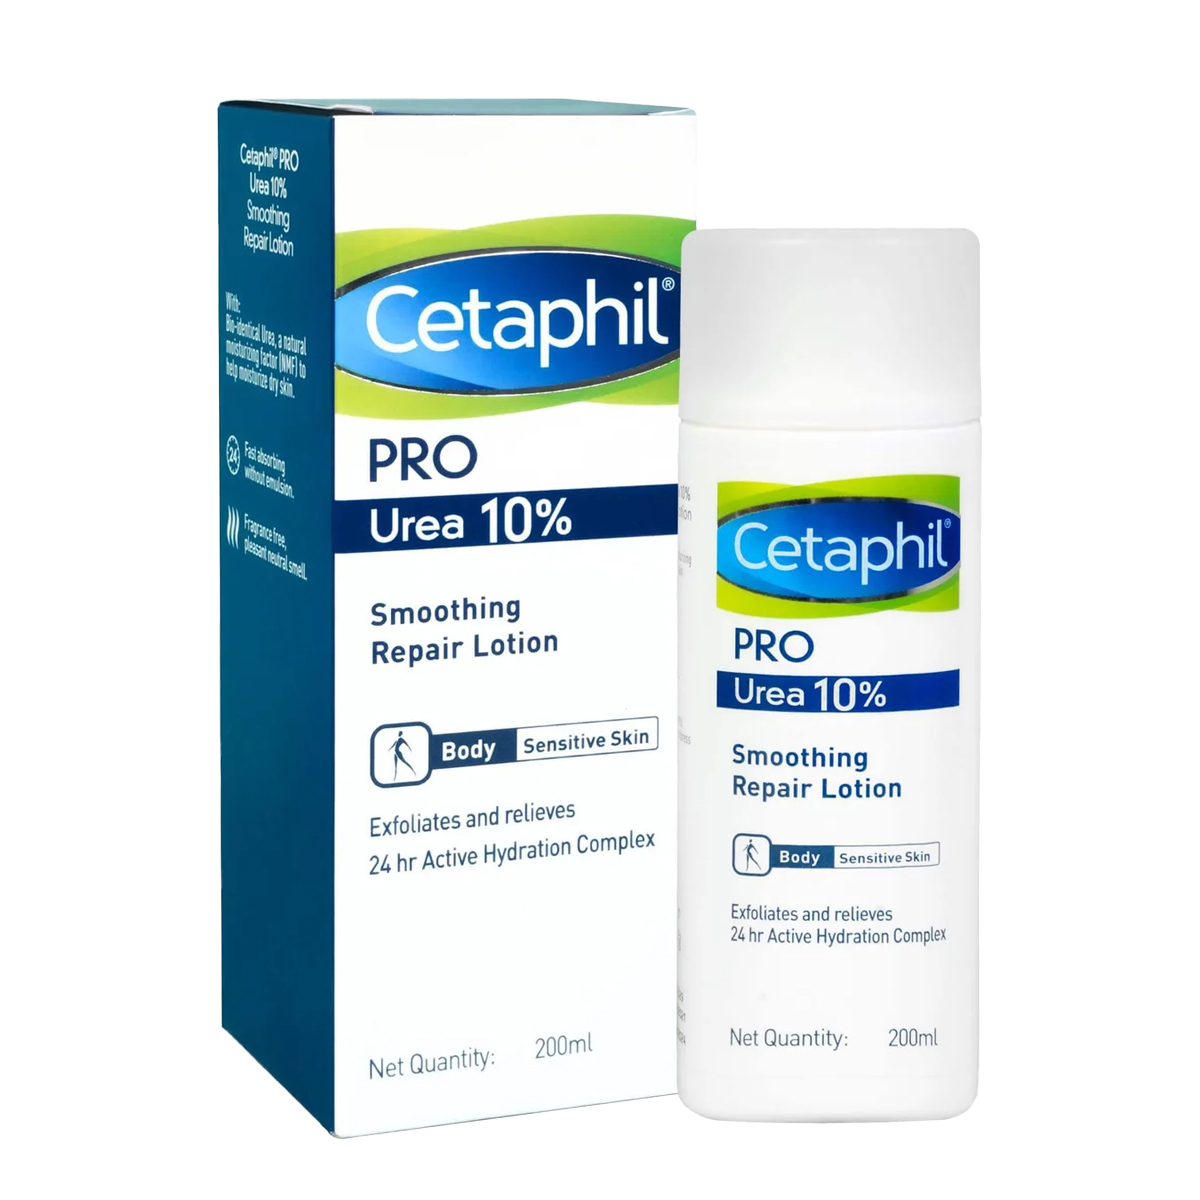 Cetaphil Pro Urea 10% Smoothing Repair Lotion For Body For Sensitive Skin, 200ml